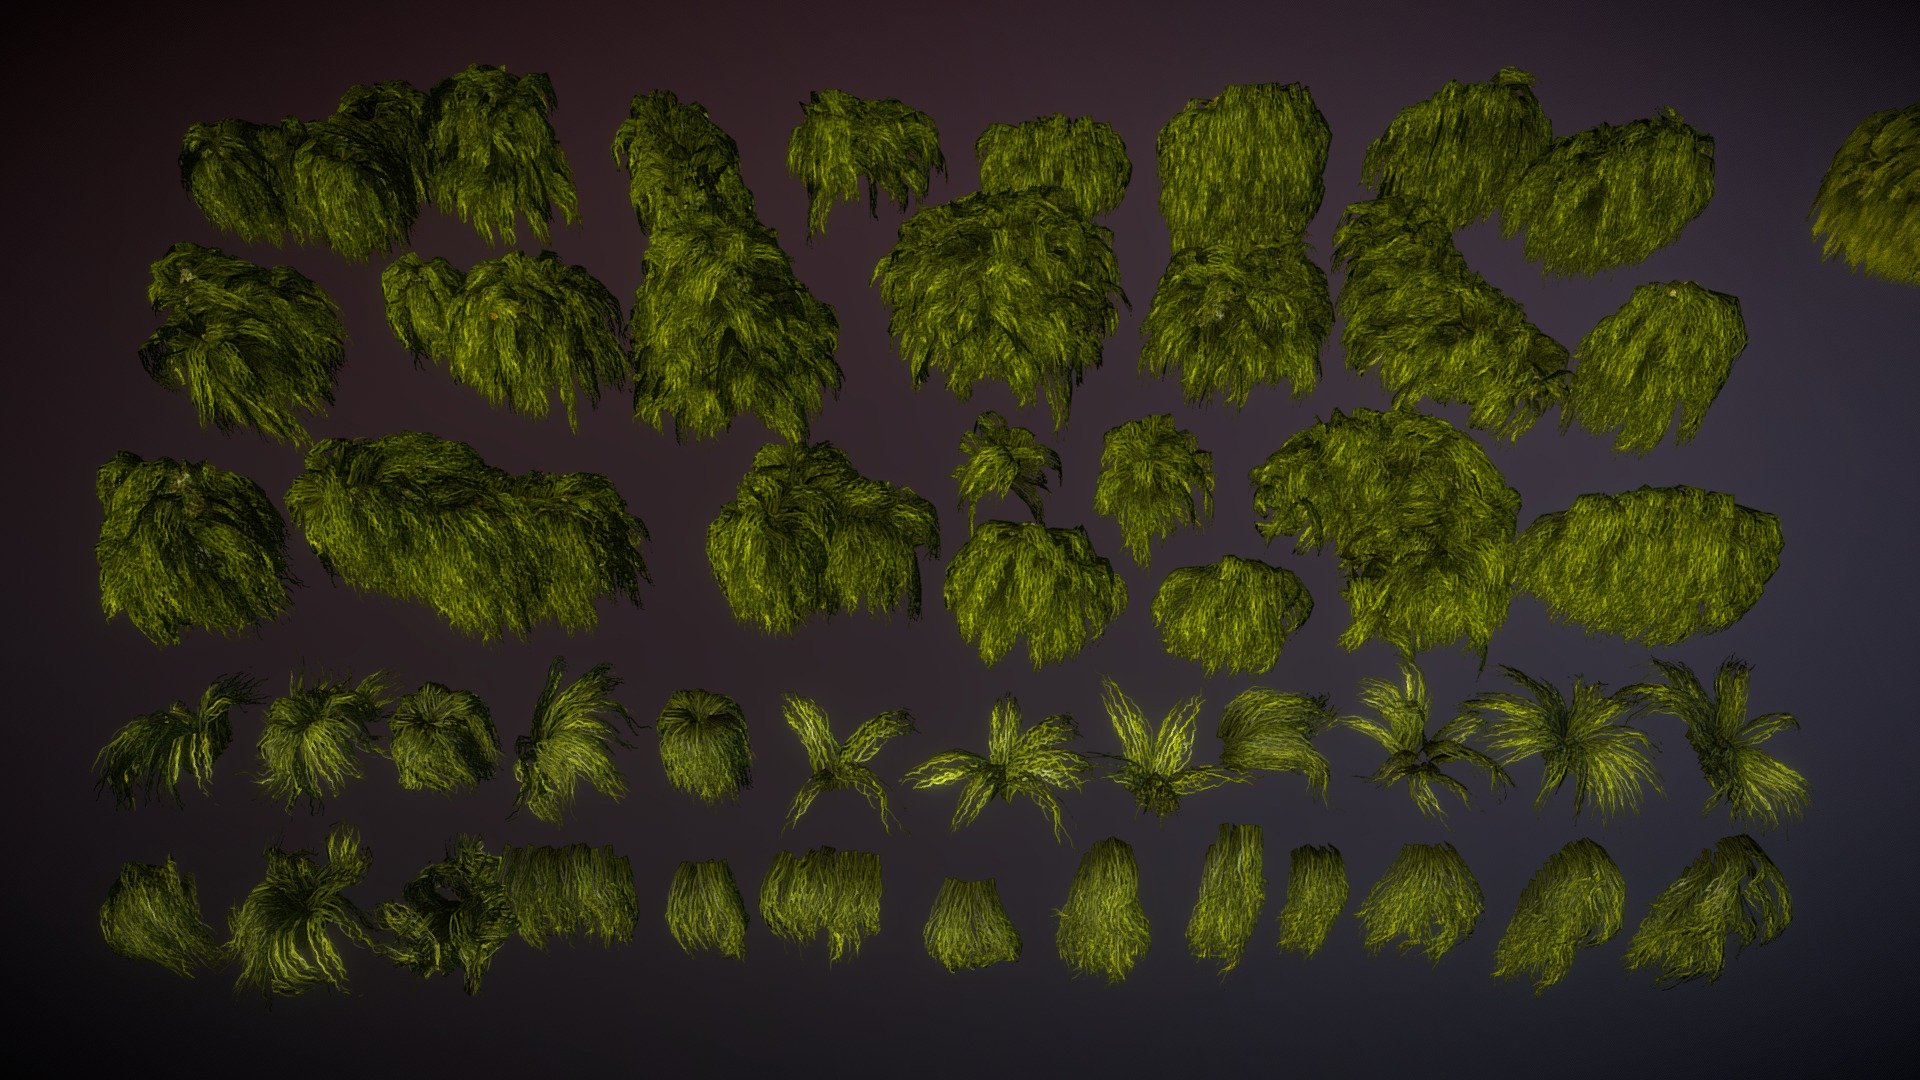 A lot of swamp tussocks which you can find at the Unity asset store and Unreal marketplace 3d model